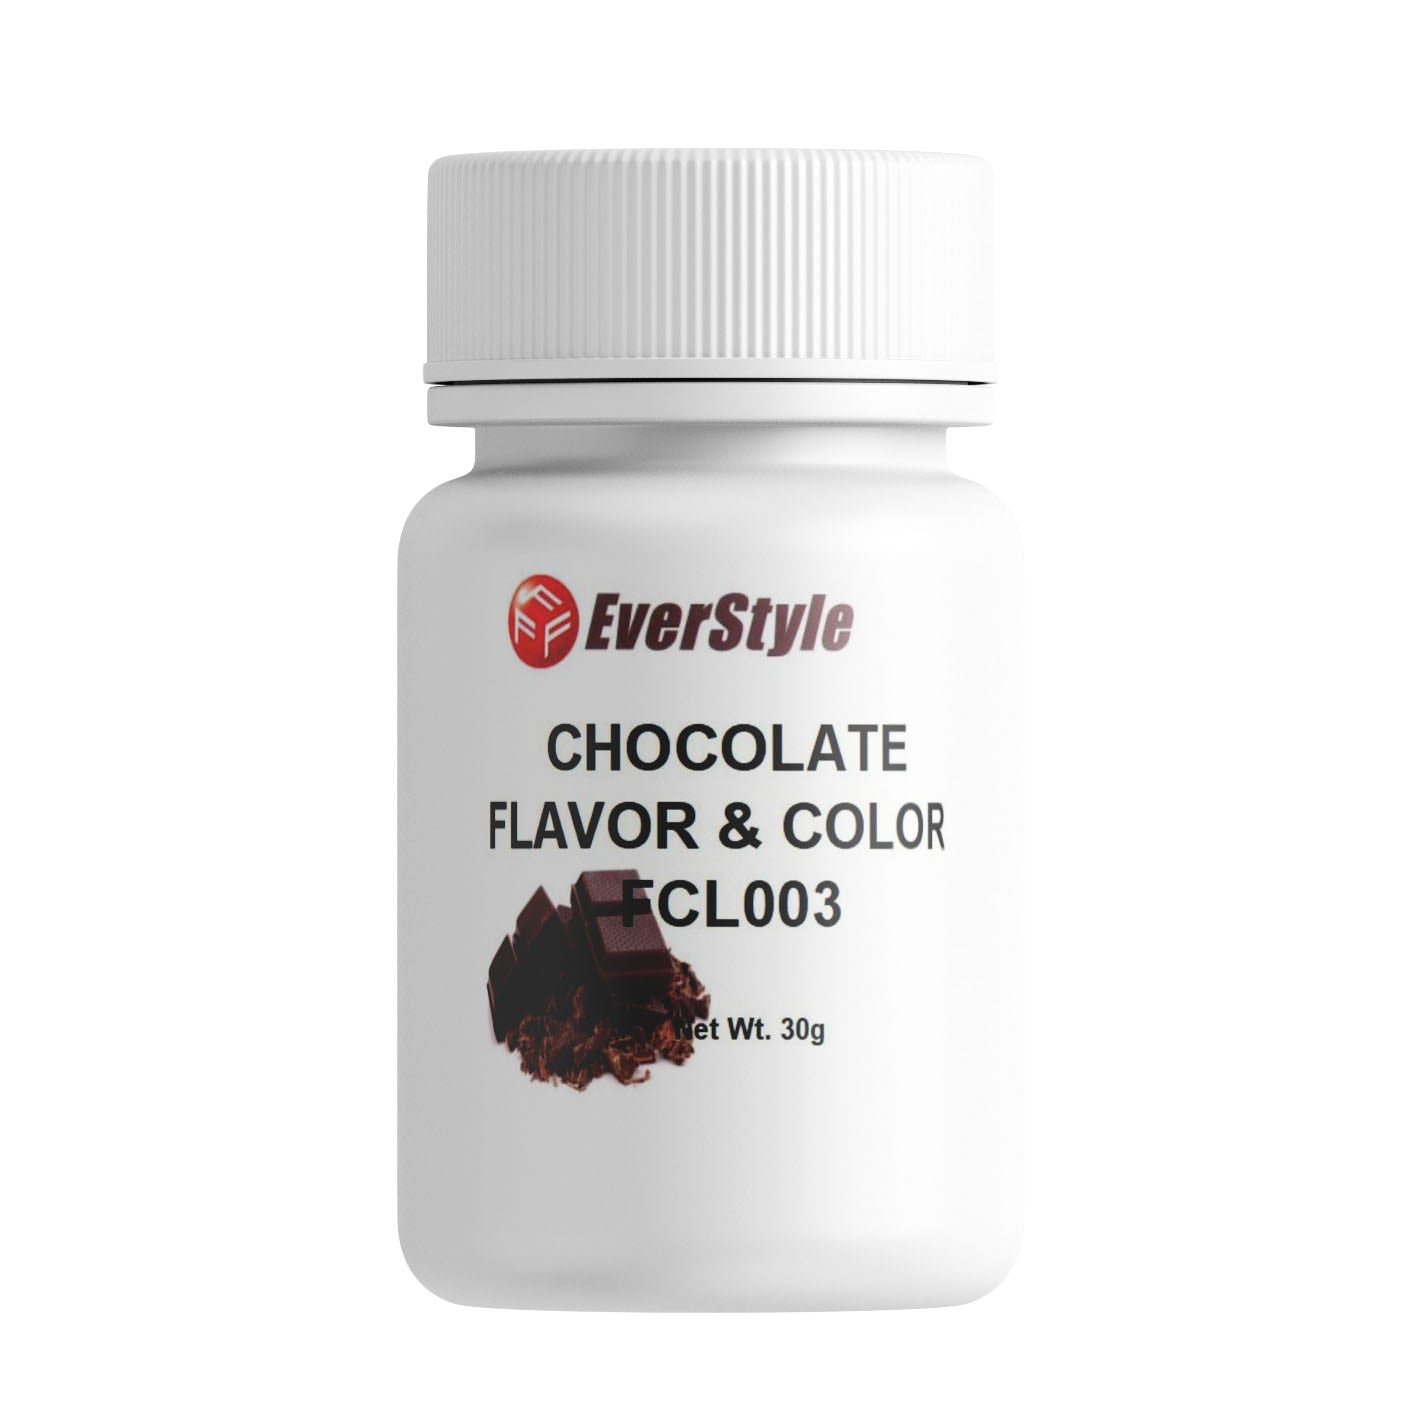 Everstyle Chocolate Flavor and Color 30g (FCL003)